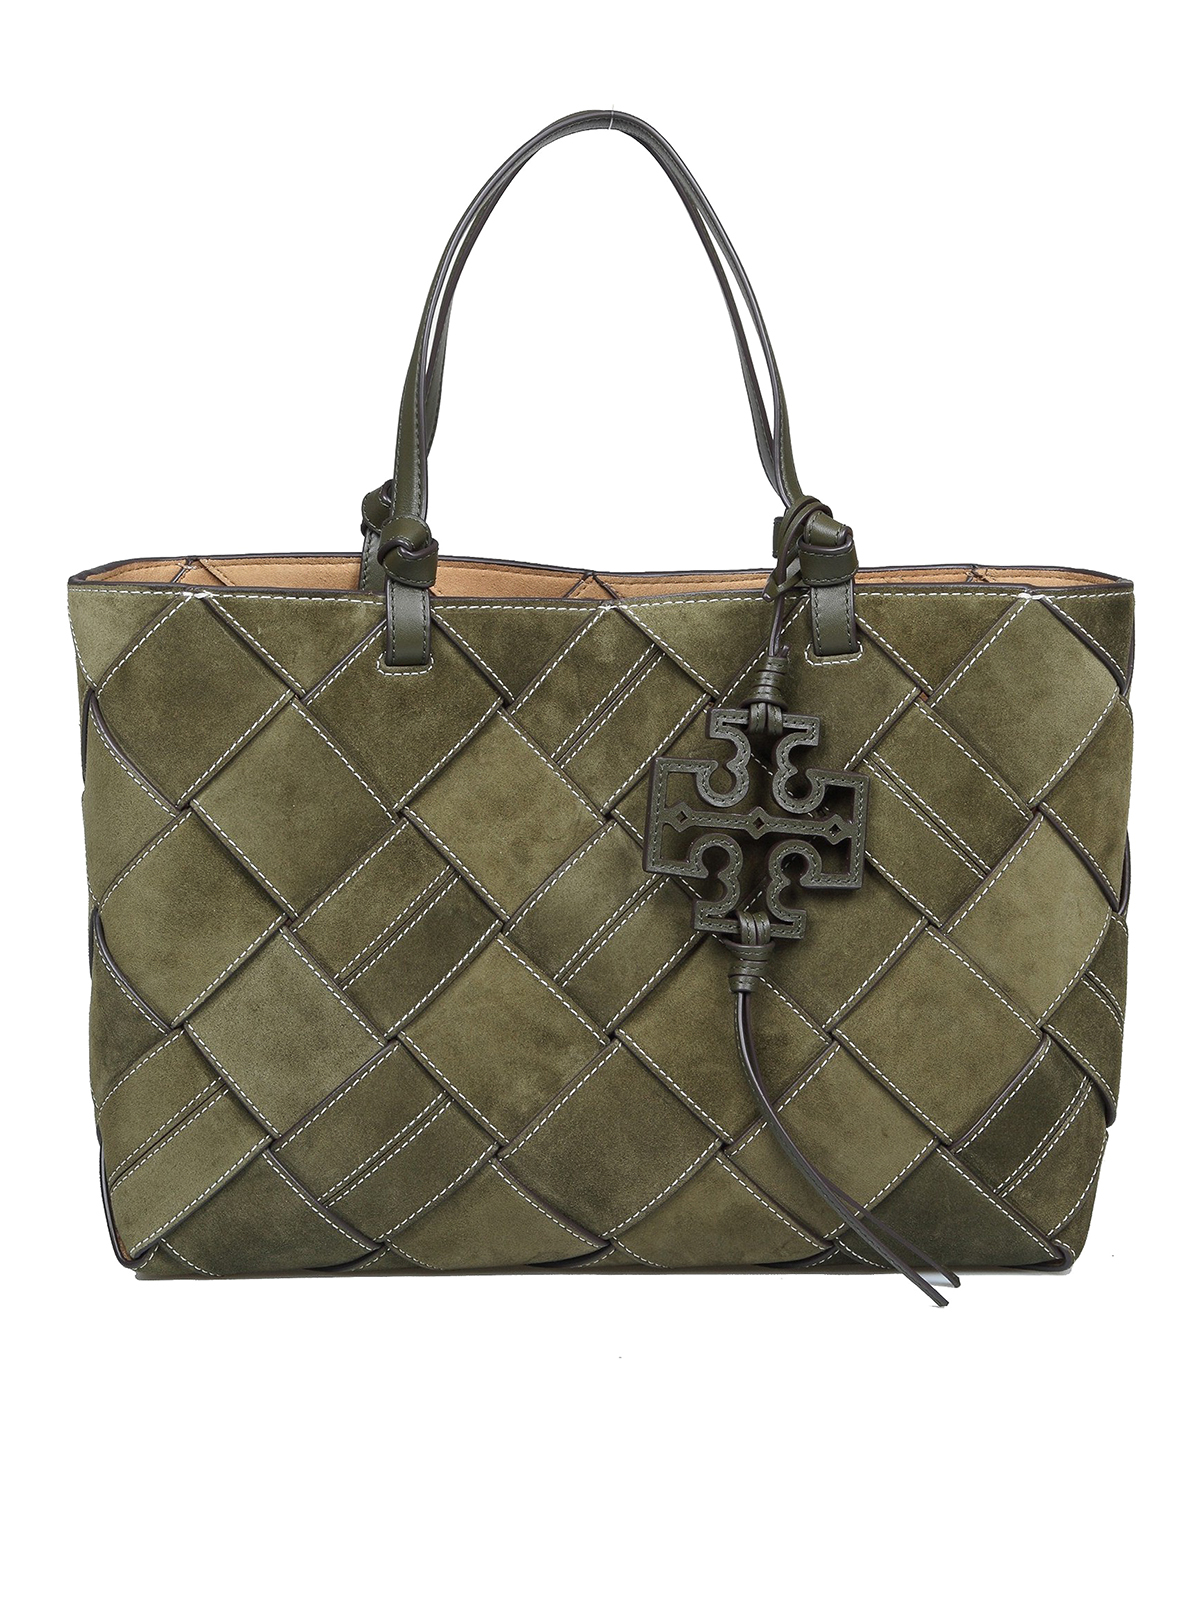 Totes bags Tory Burch - Braided suede bag with pochette - 142673766